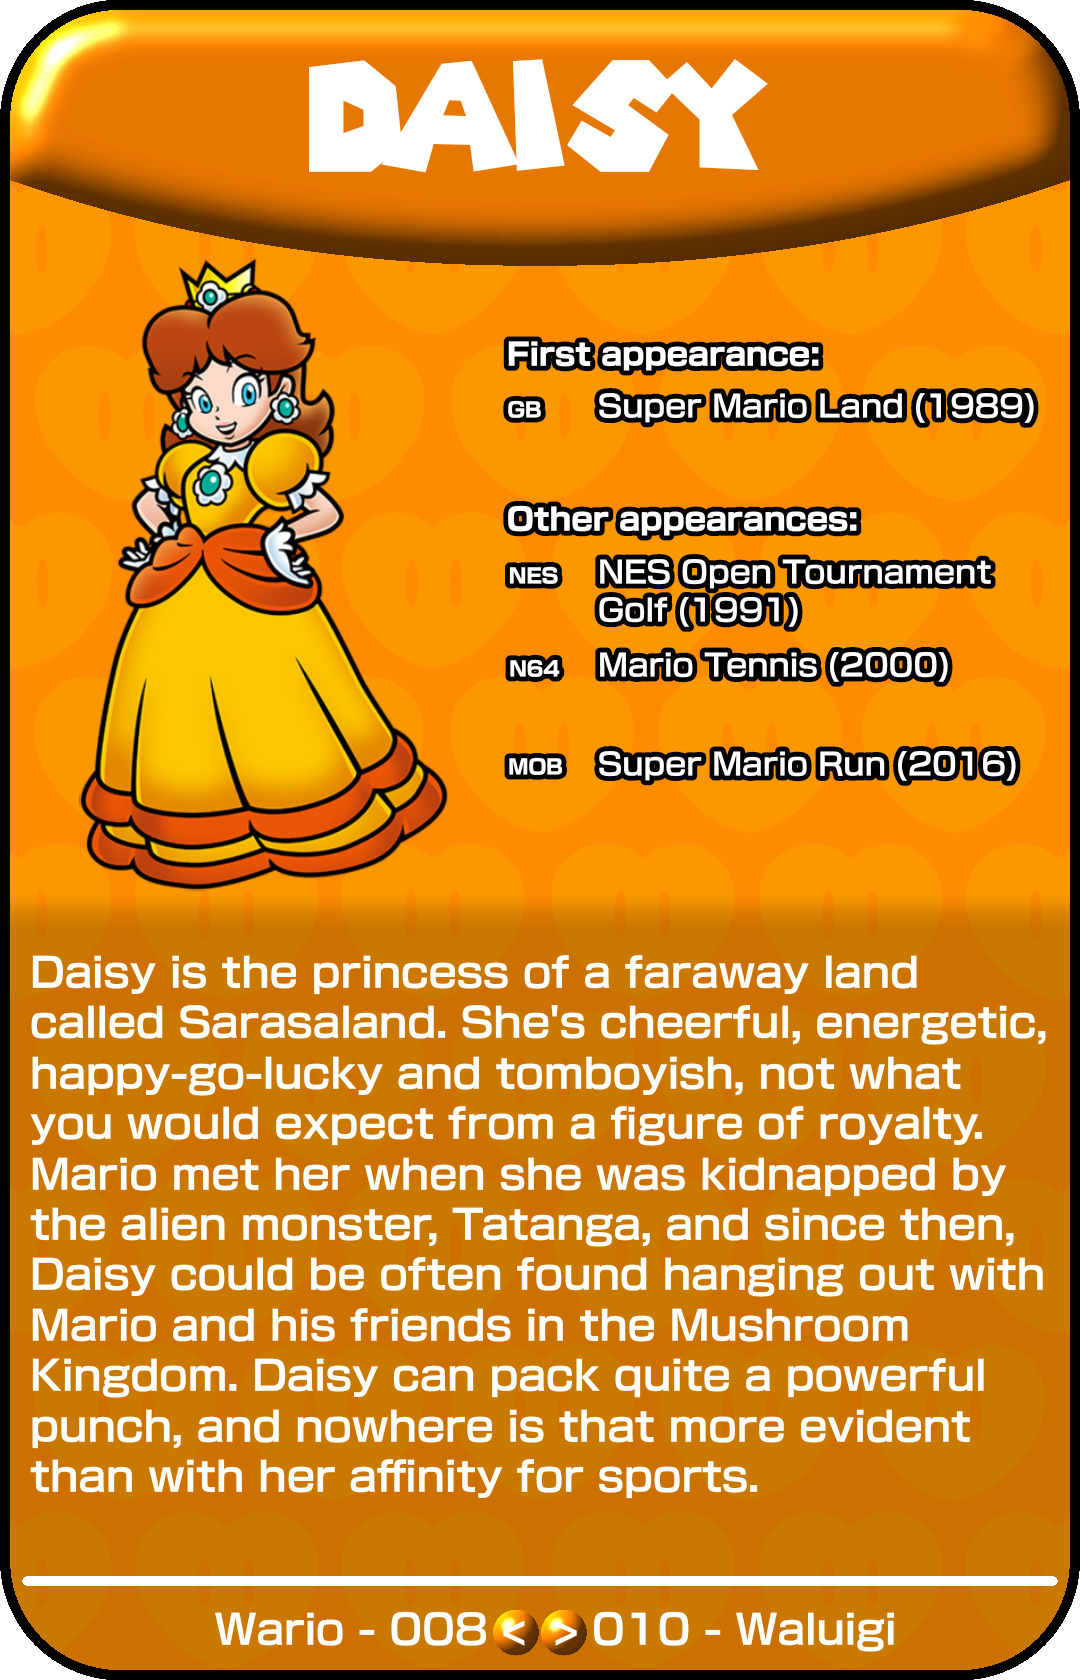 009 - Daisy (2).png